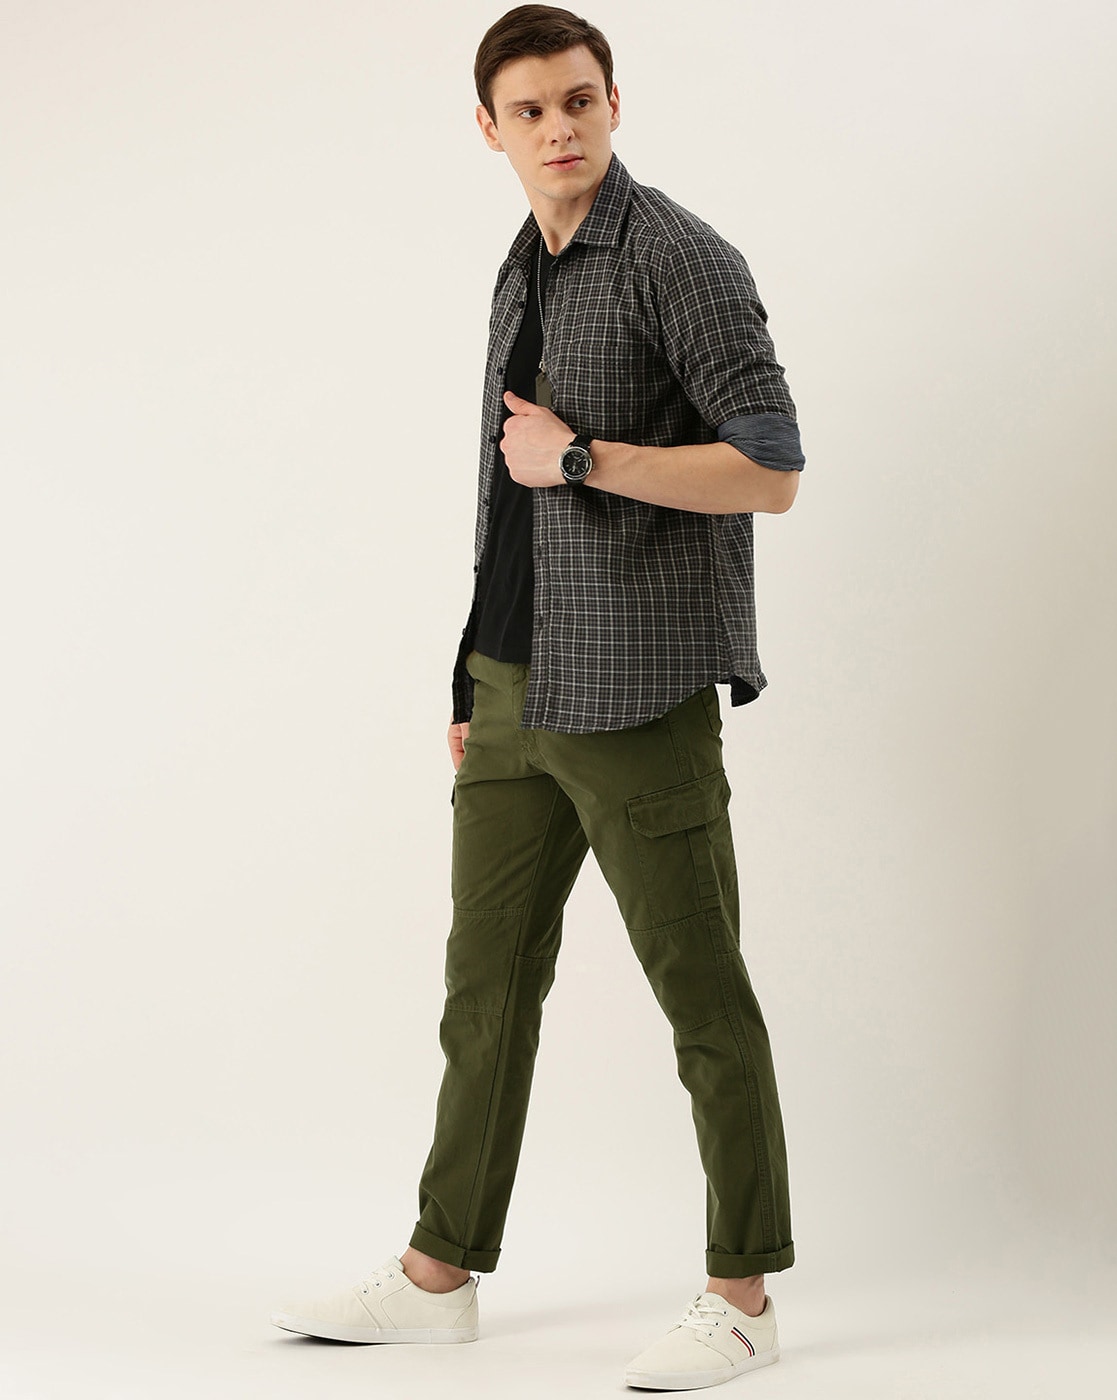 Outfit With Olive Green Pants, Buy Now, Flash Sales, 50%, 54% OFF